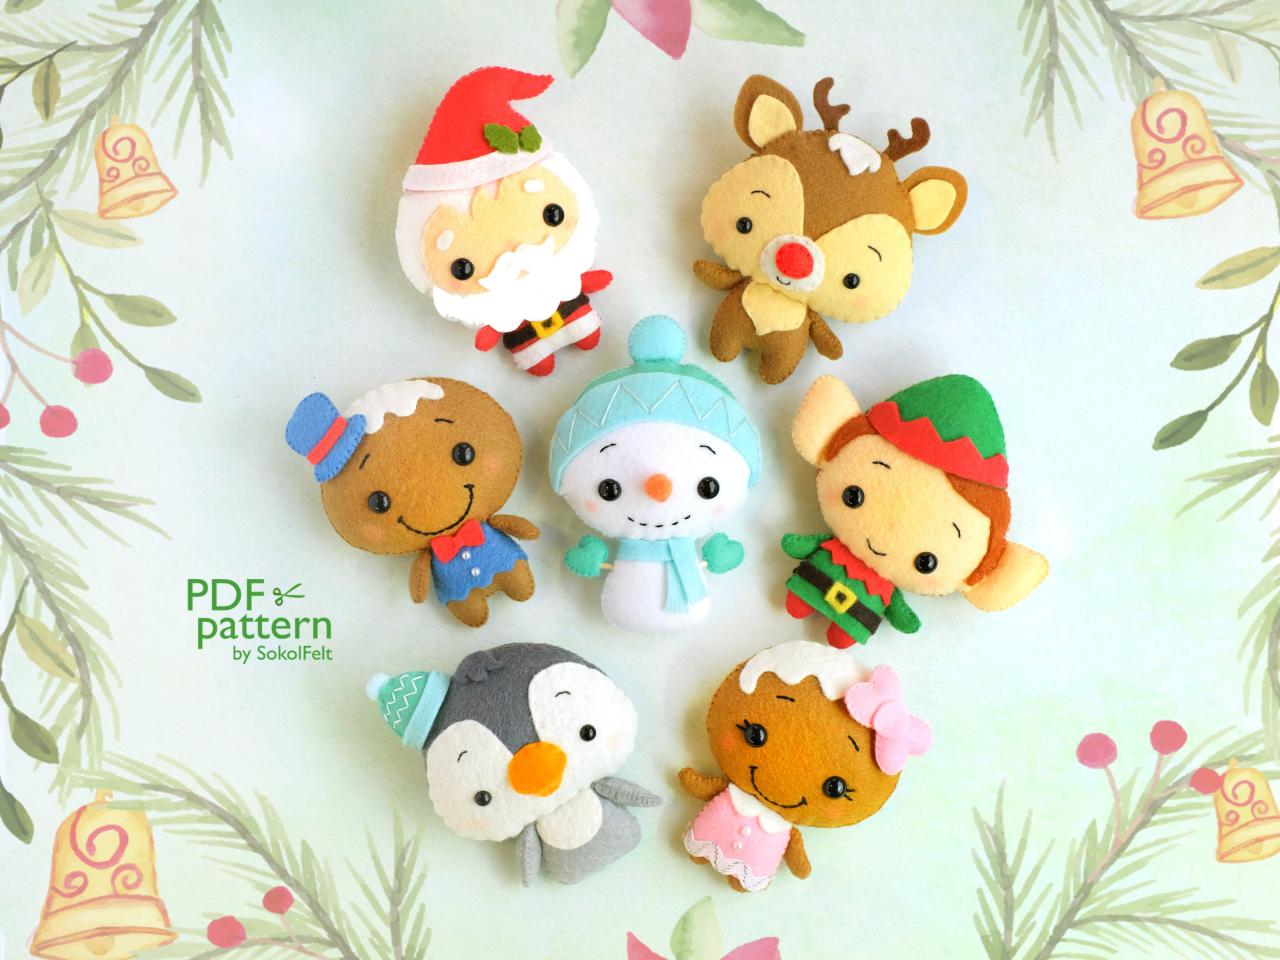 Set of 7 Felt Christmas toy sewing PDF and SVG patterns, Santa, Rudolph, Elf, Snowman, Mr. and Mrs. Gingerbread and Penguin Felt baby mobile